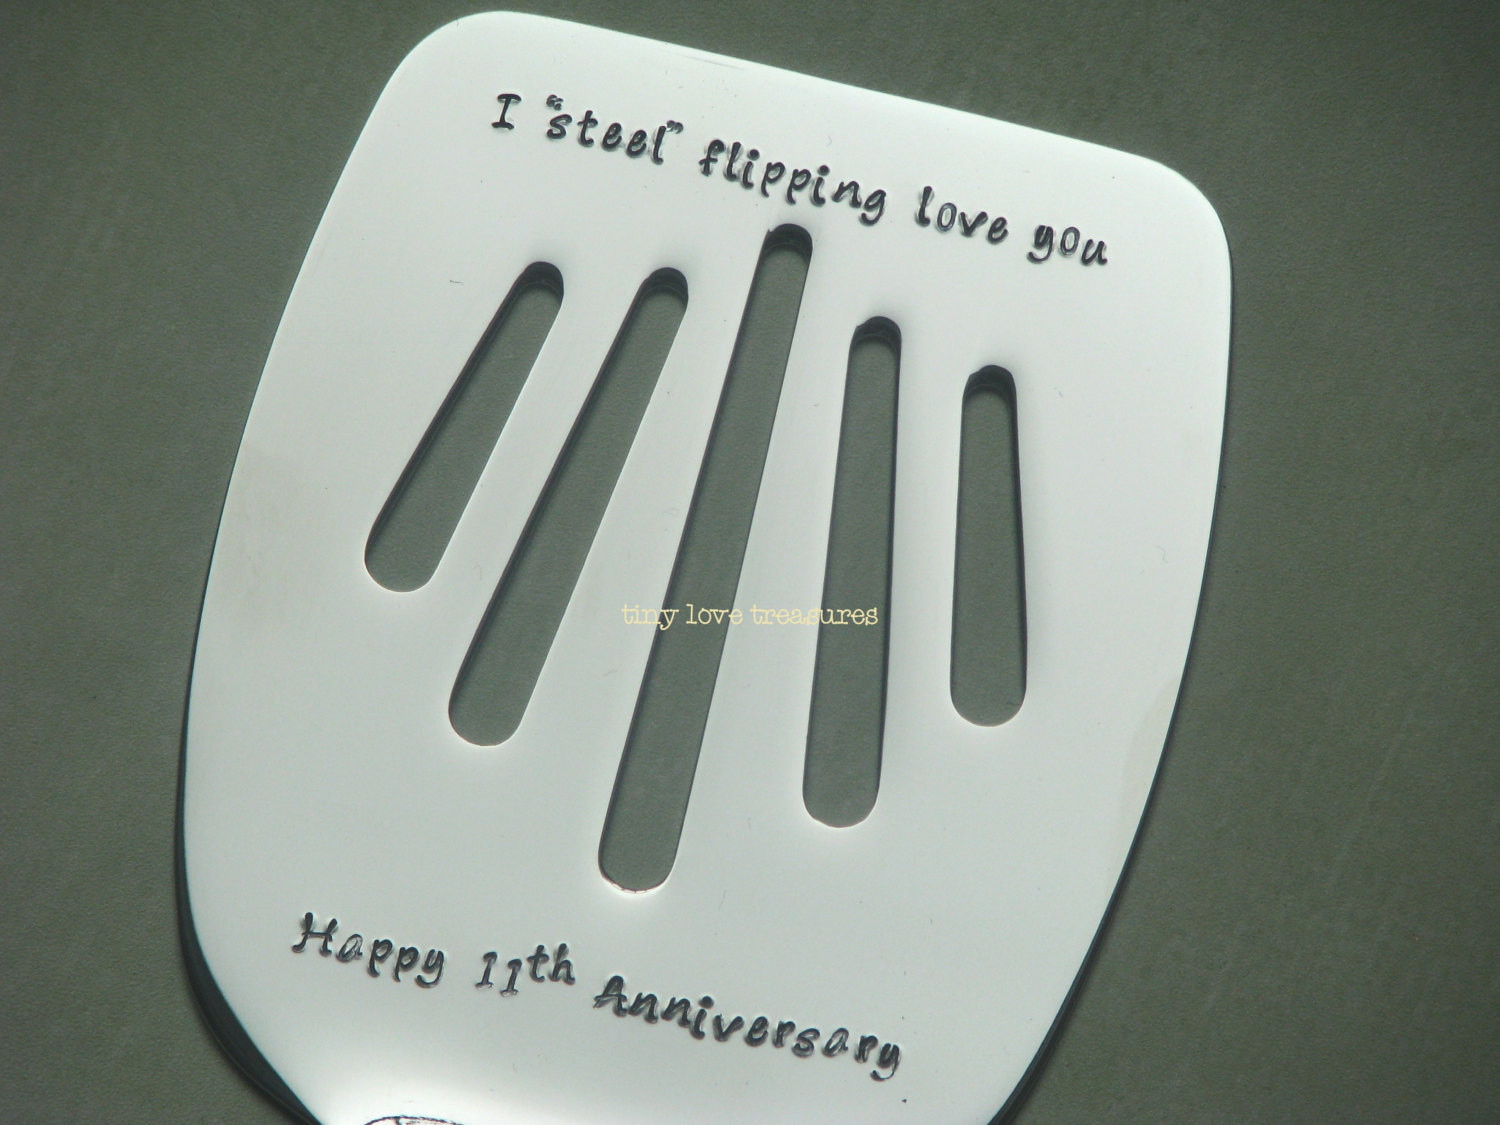 Steel Anniversary Gift Ideas
 I steel flipping love you 11th Anniversary personalized